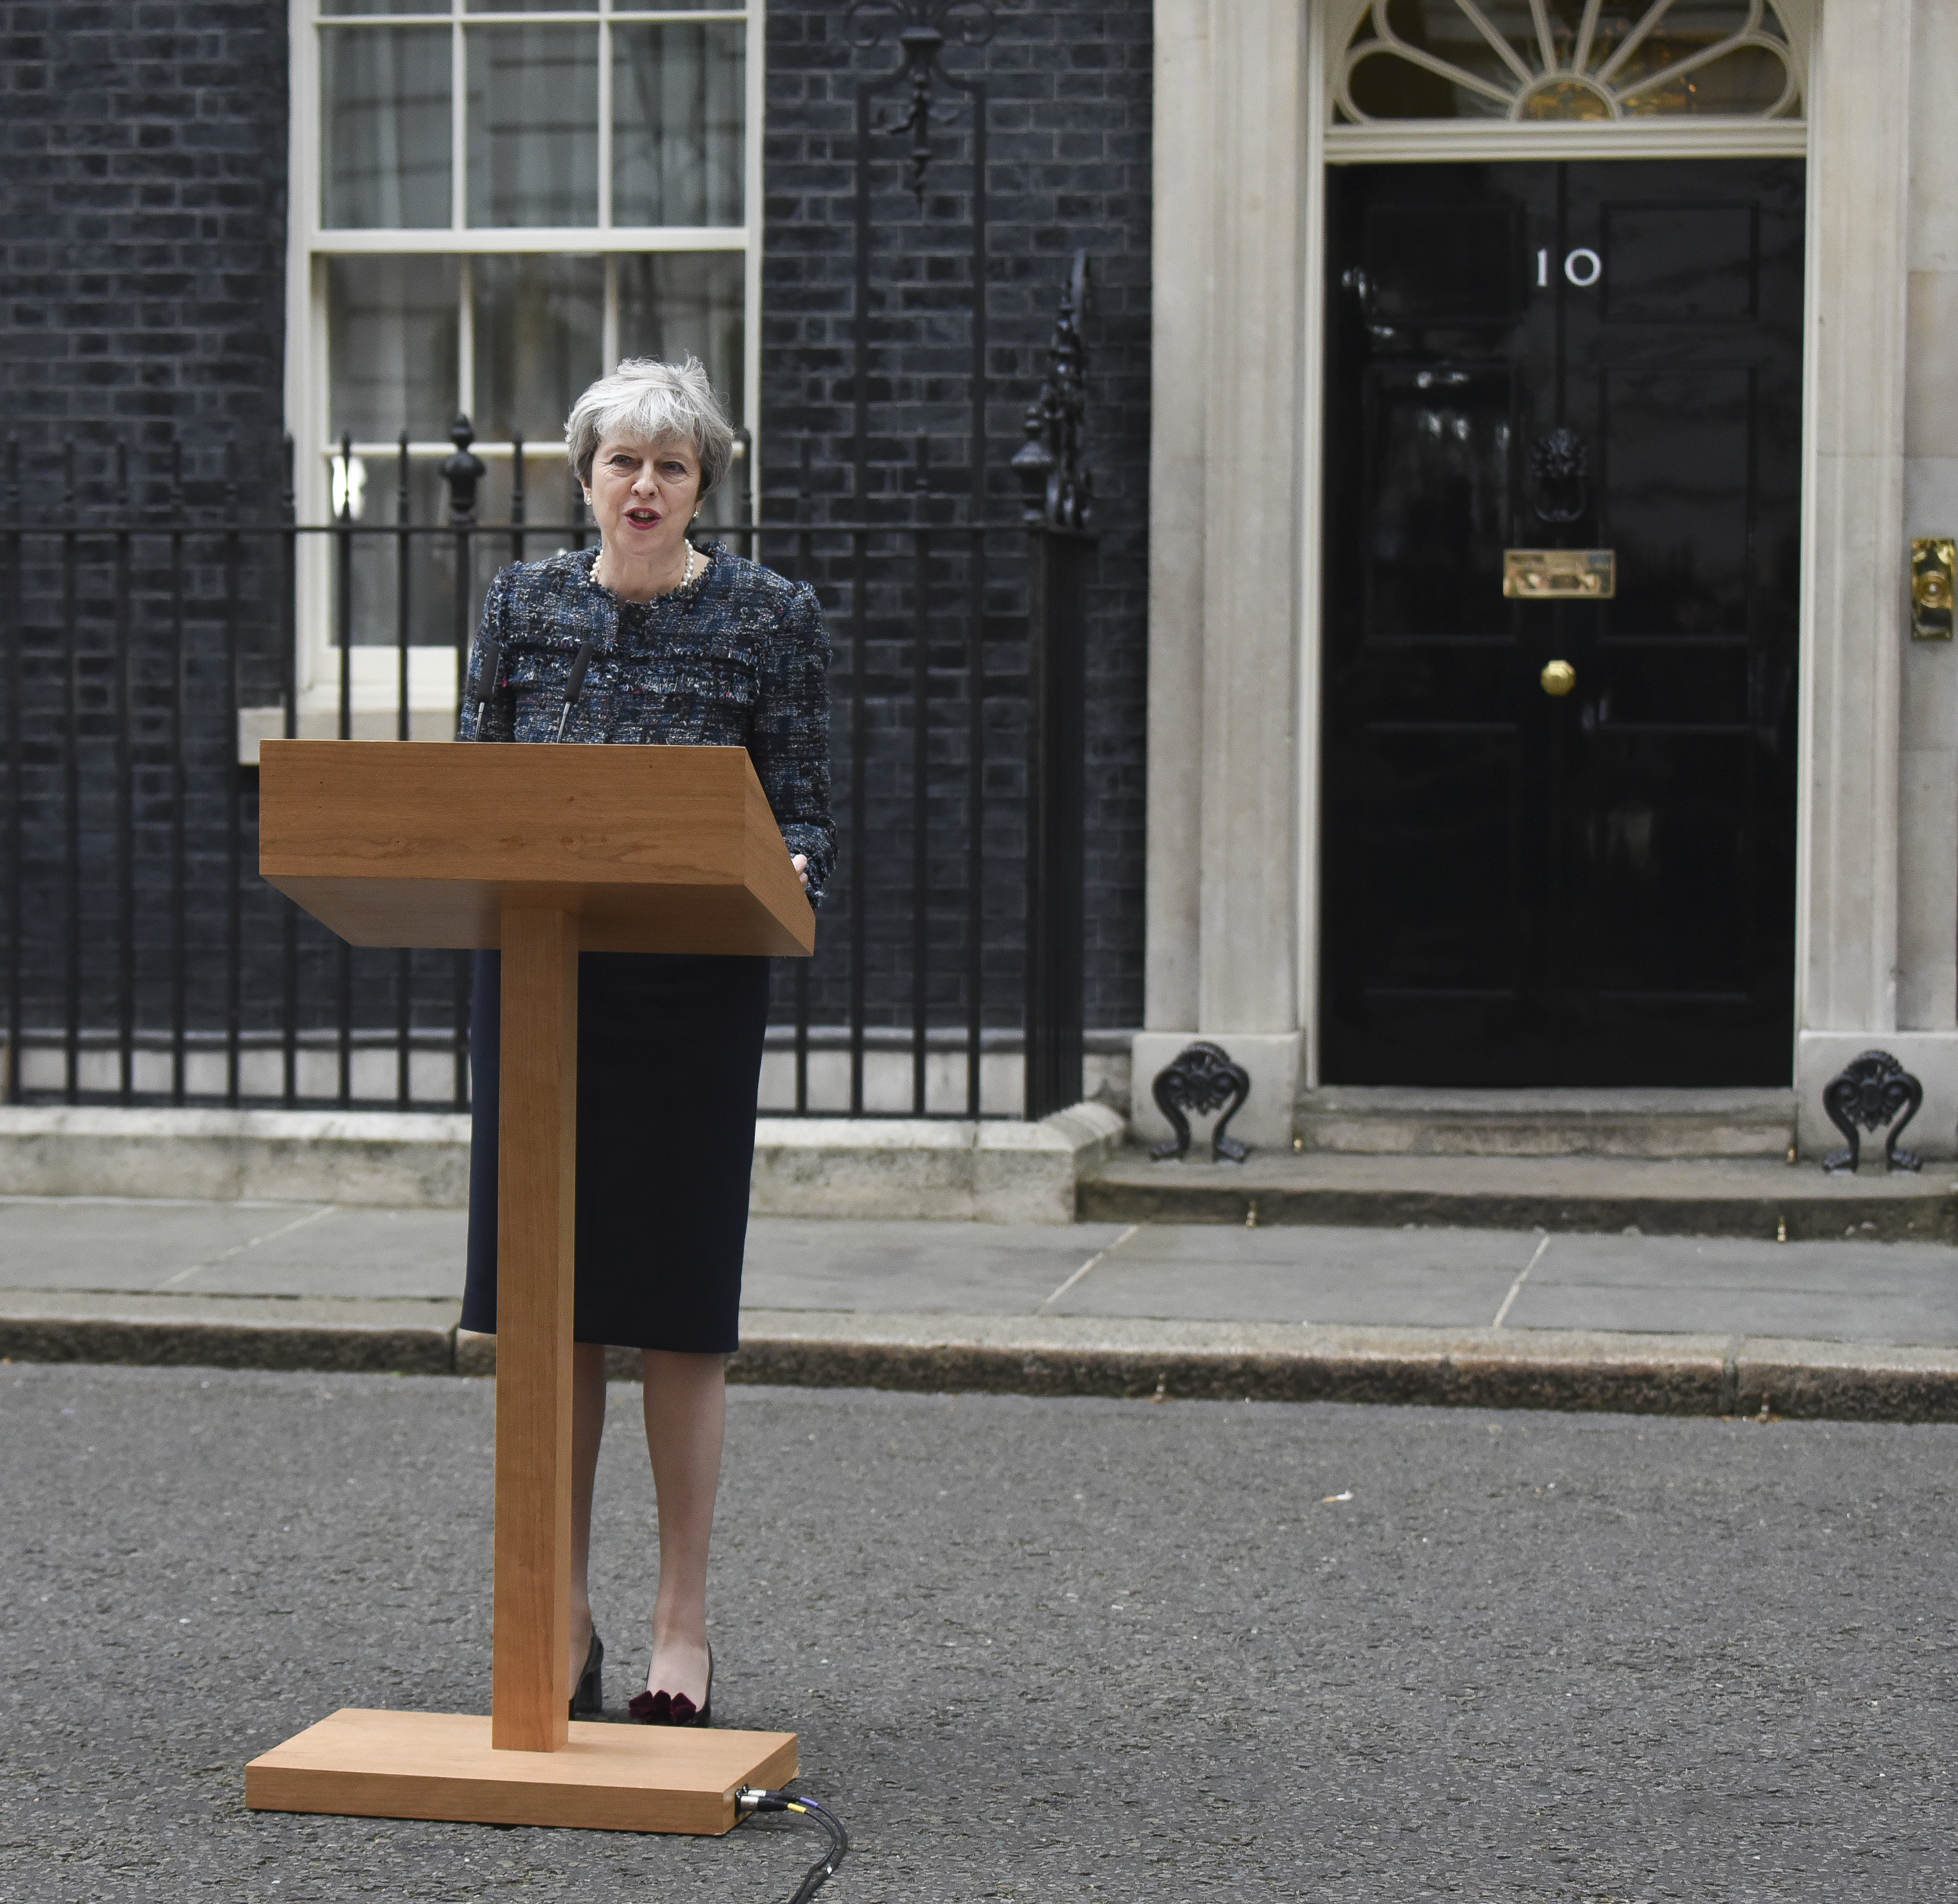 Prime Minister Theresa May seen at Downing Street after seeing the Queen and making a speech to the nation on May 03, 2017 in London. (Steve Back—Barcroft Images via Getty Images)